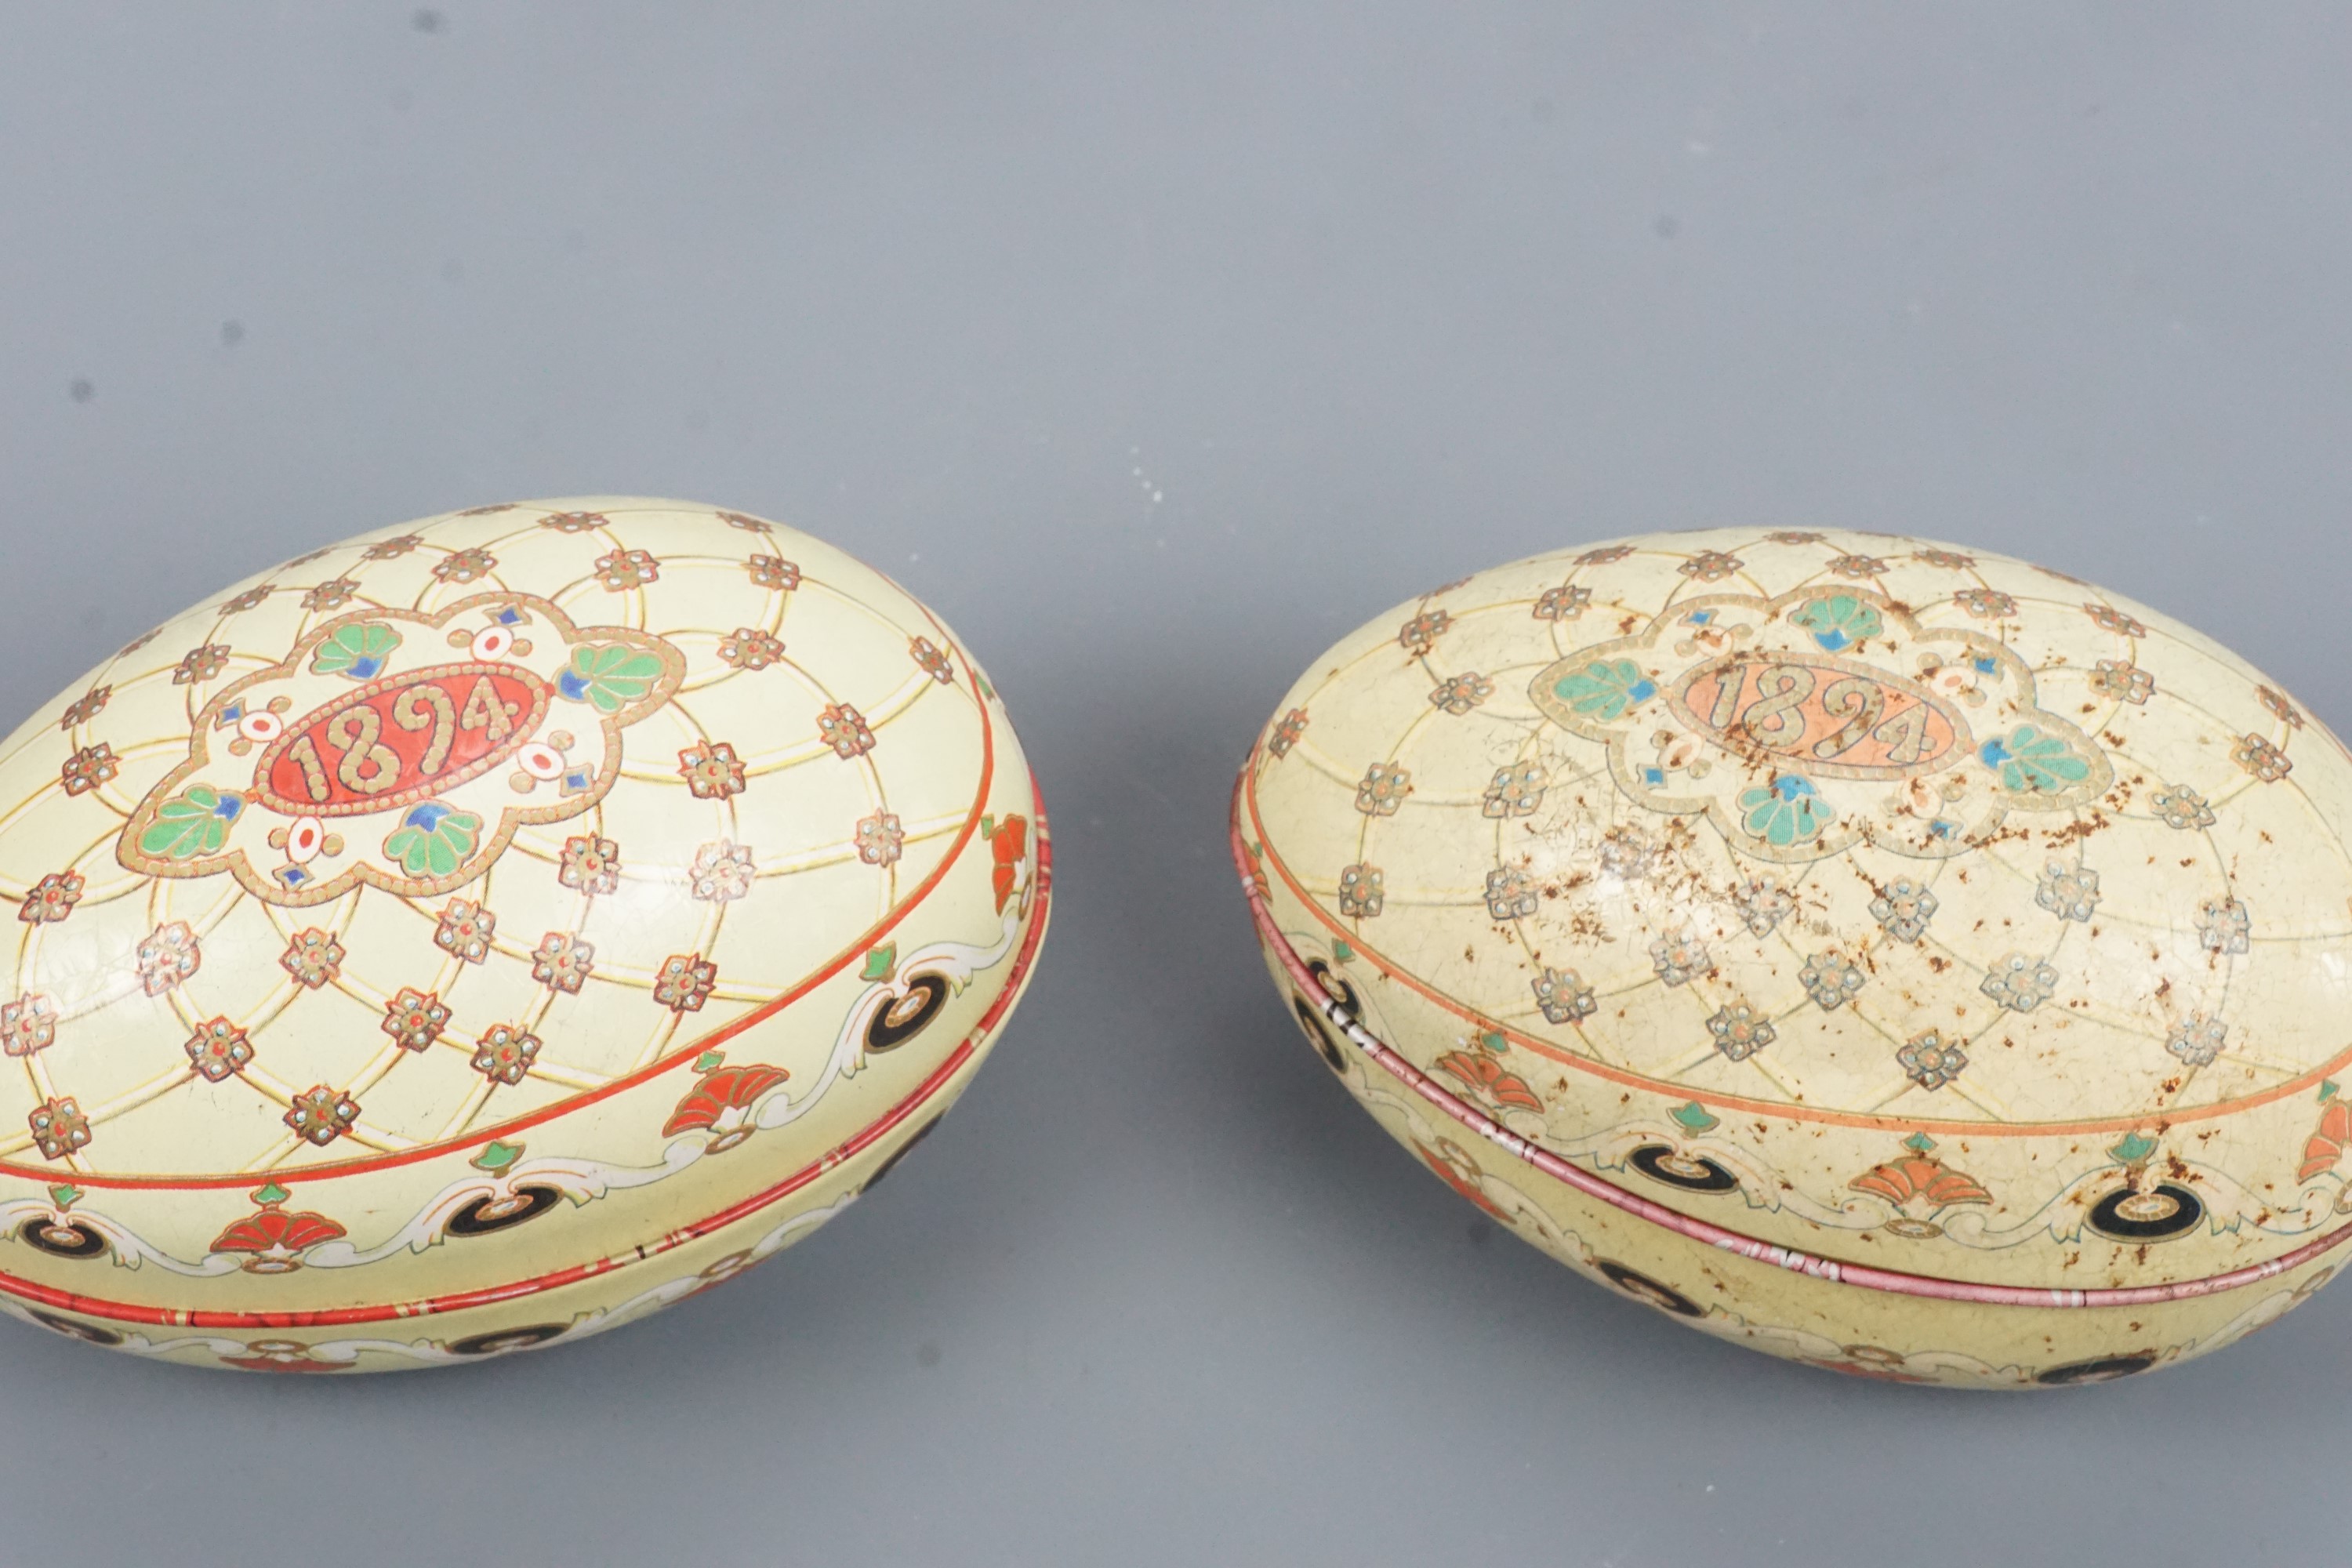 Two reproduction printed tinplate 1894 Easter egg boxes, 21 cm - Image 2 of 3